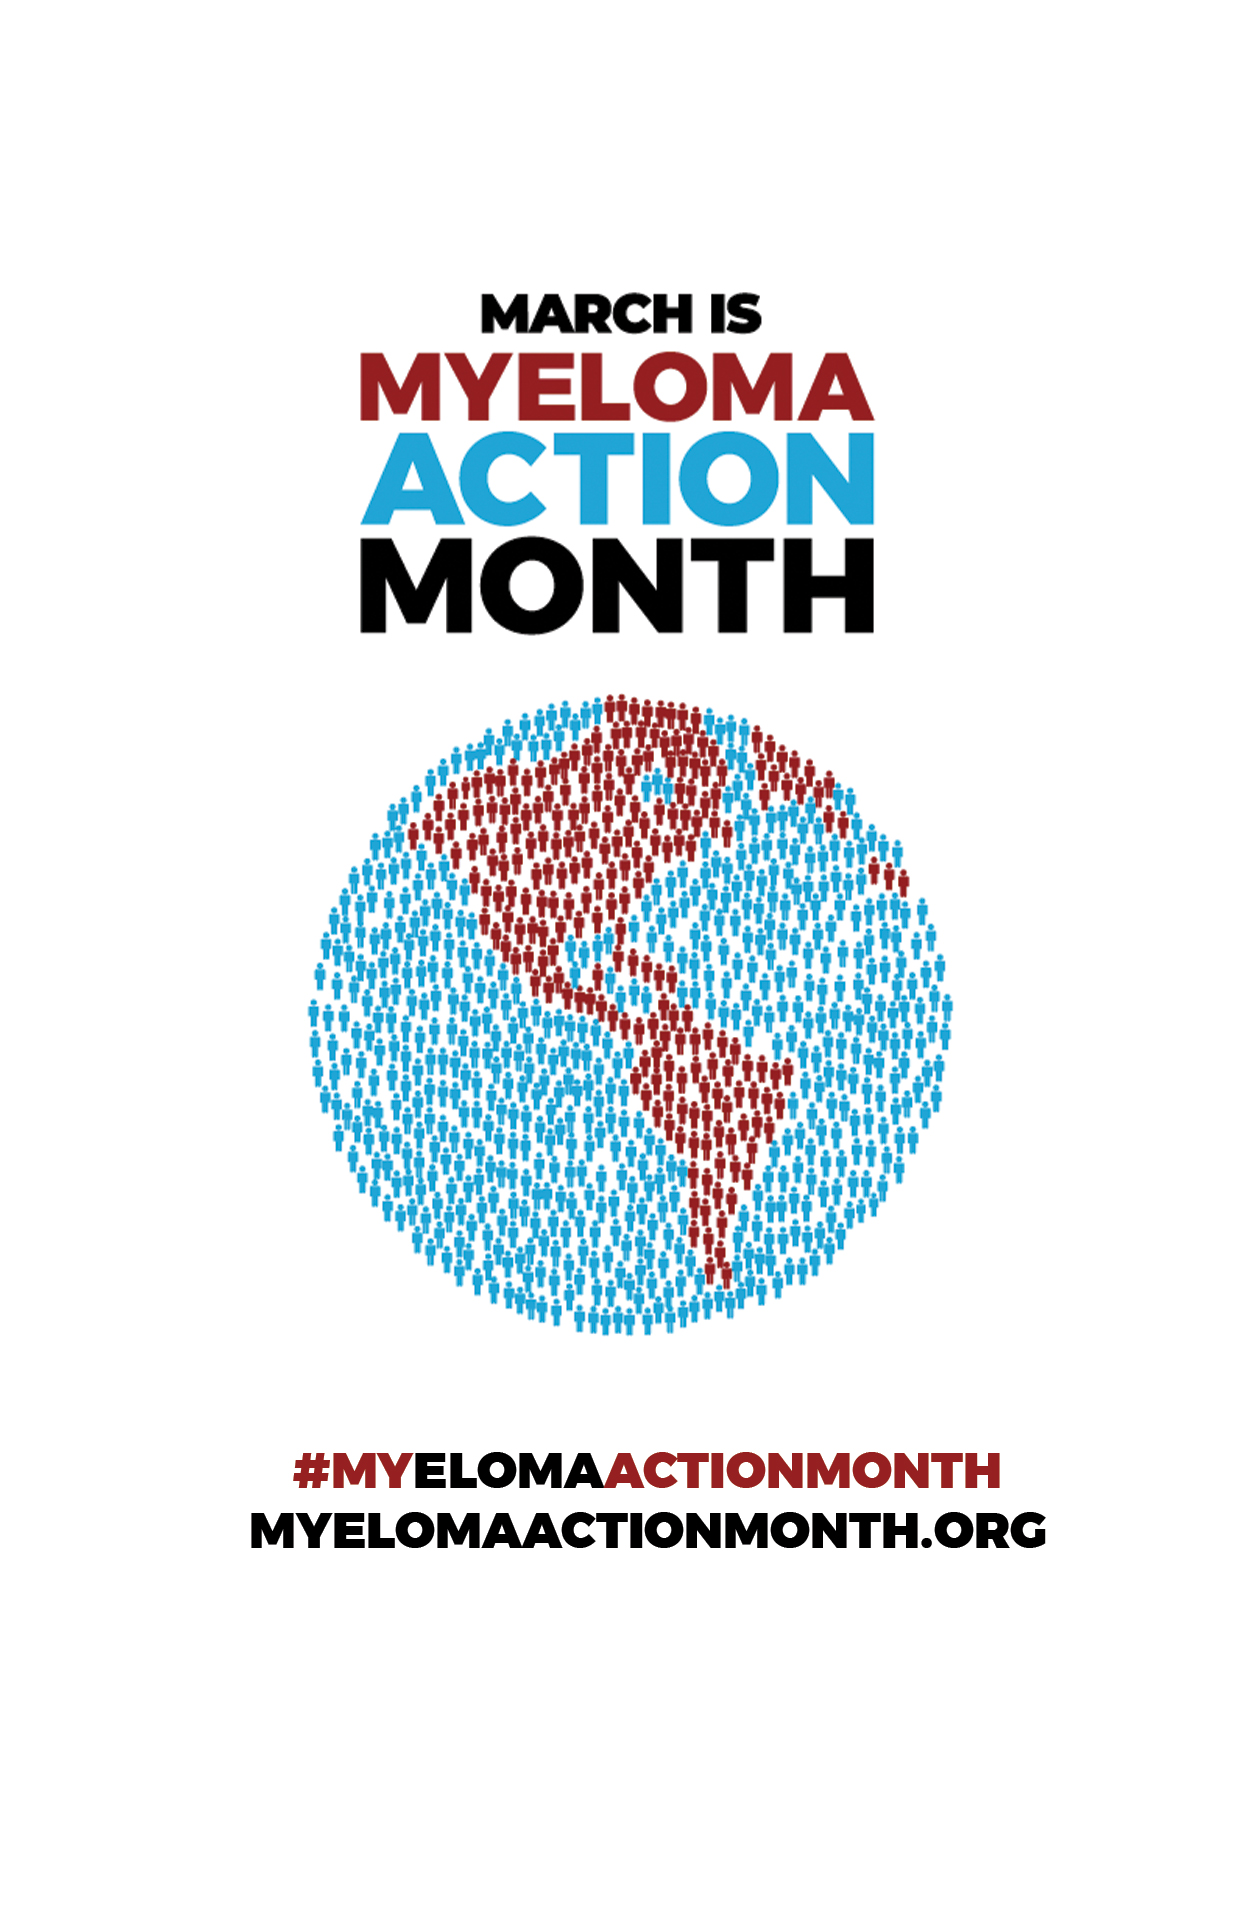 March is Myeloma Action Month